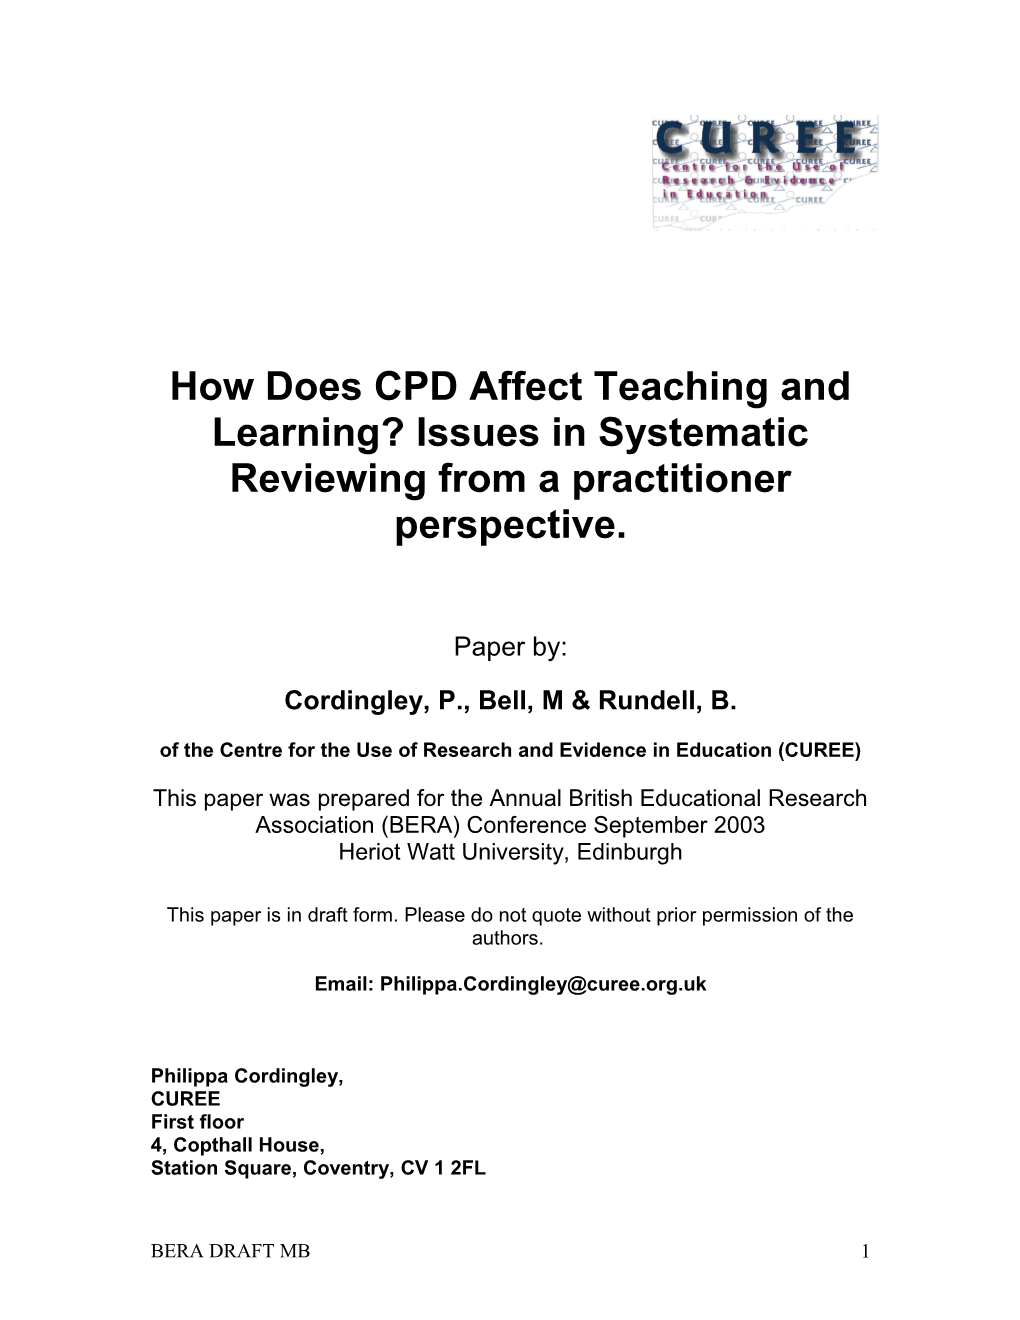 How Does CPD Affect Teaching and Learning